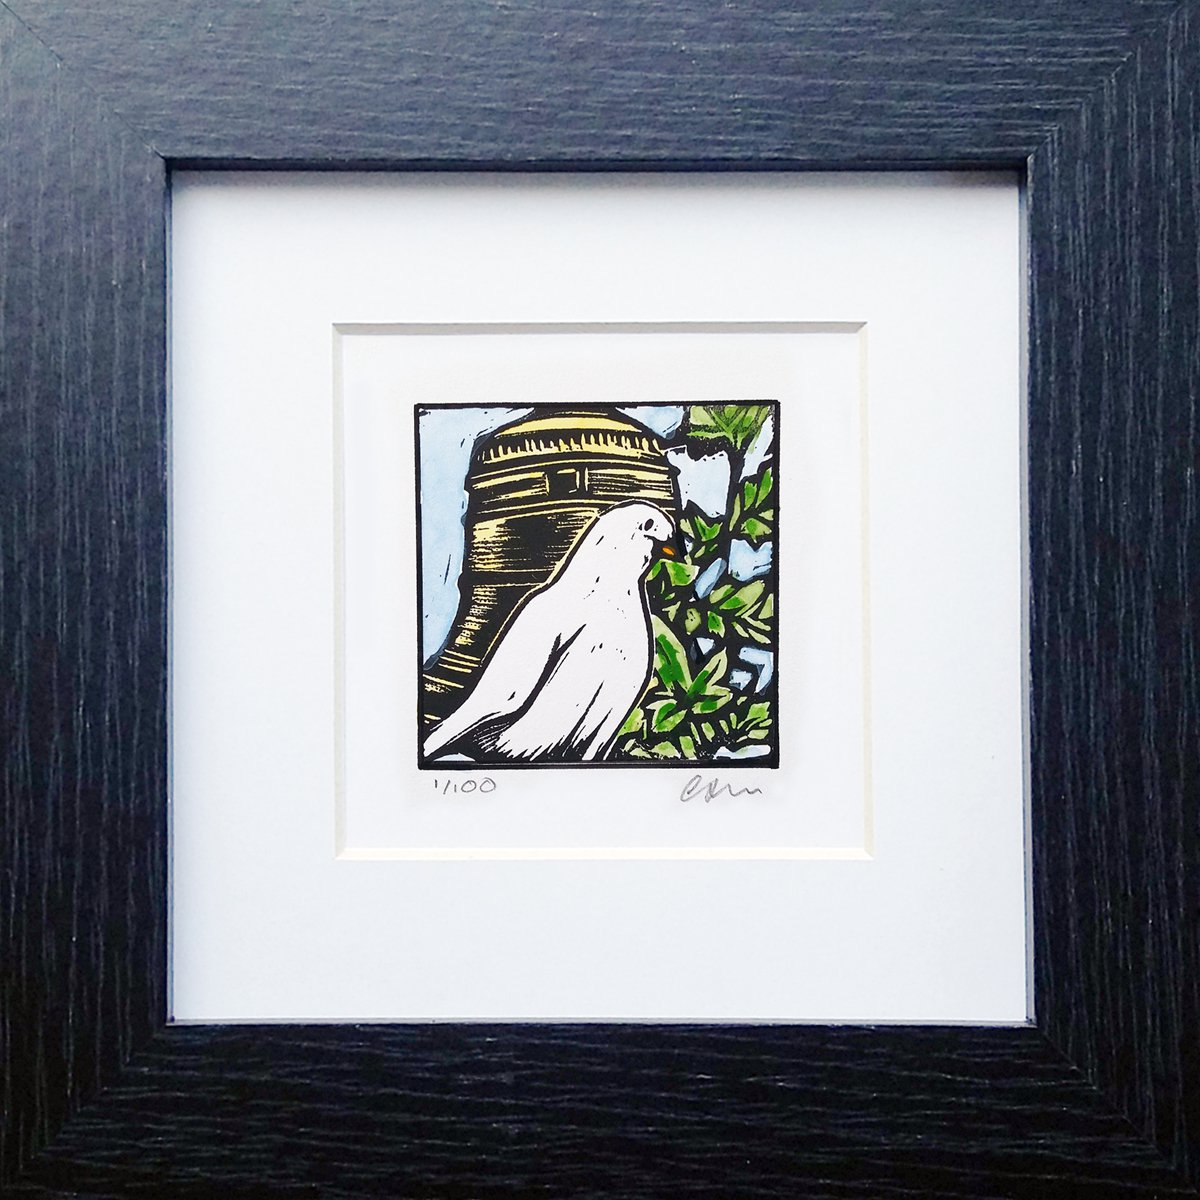 I heard the bells on Christmas day - miniature hand painted linocut print based on the Chr... by Carolynne Coulson